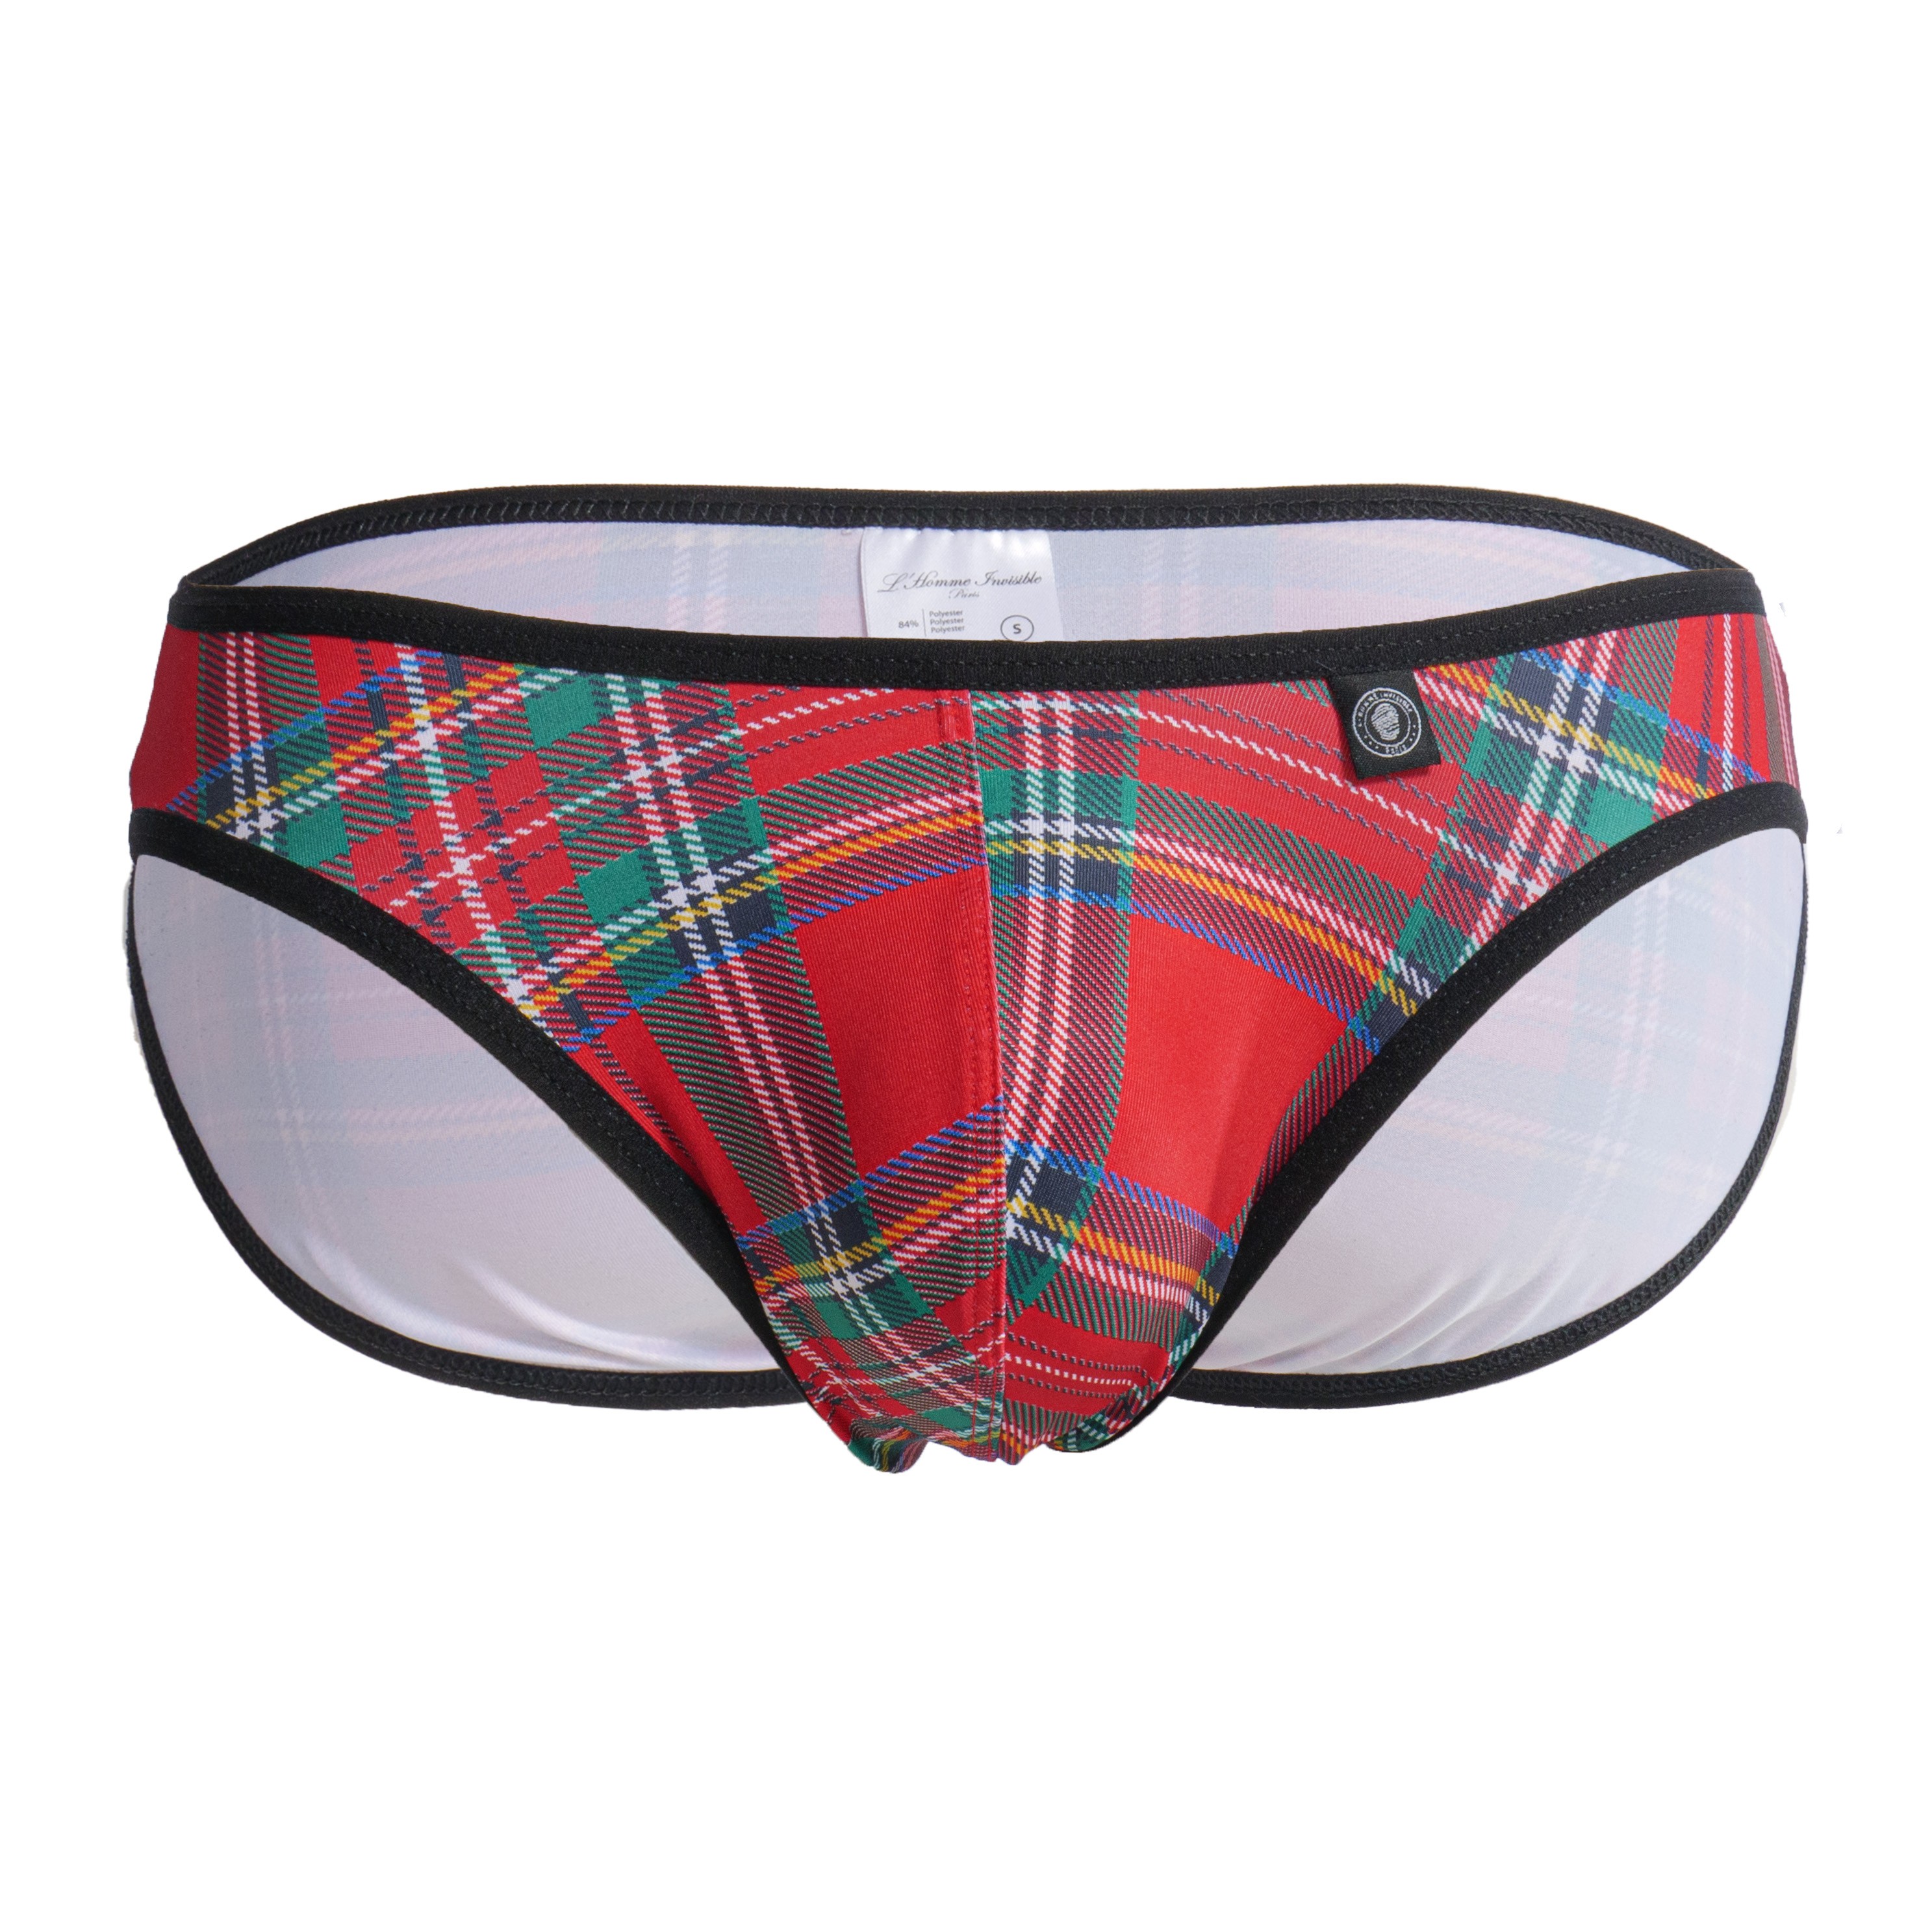 Scott - Micro Briefs: Briefs for man brand L'Homme Invisible for sa